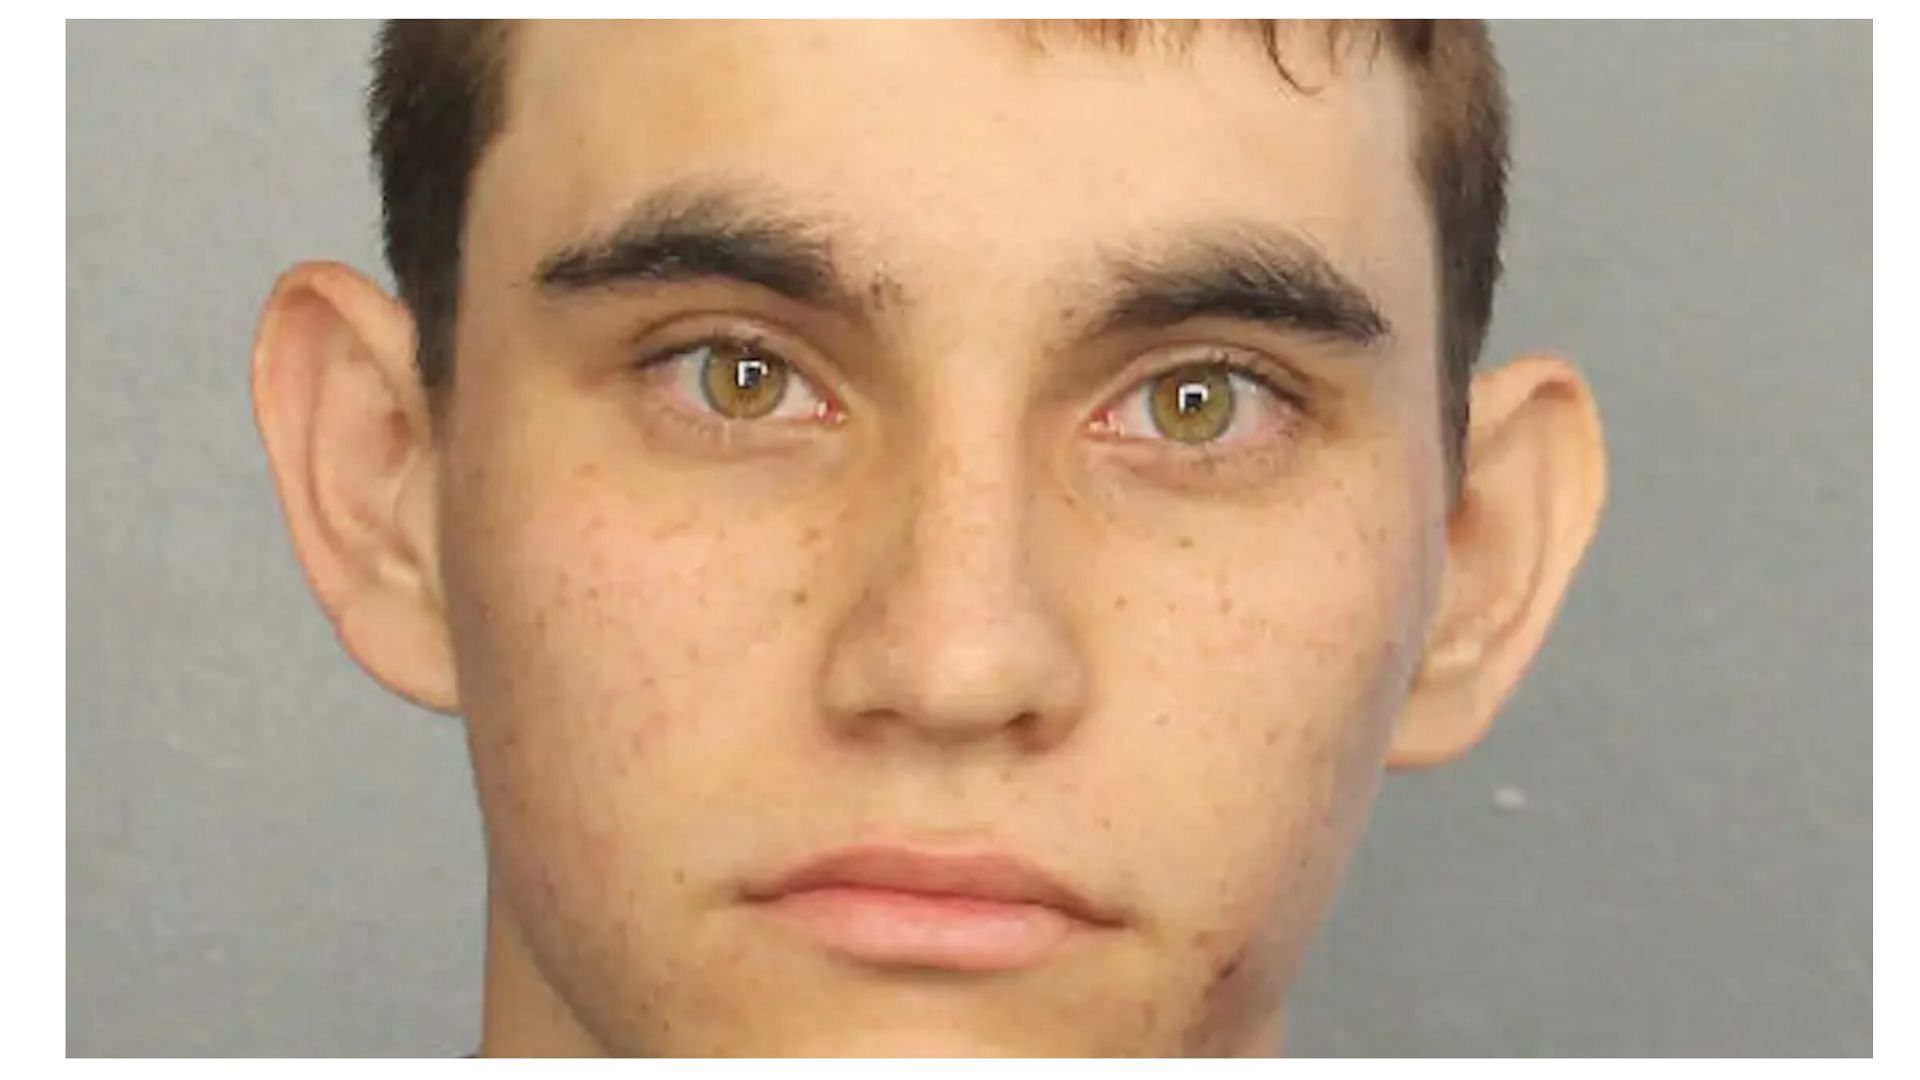 Cruz&#039;s sister said that his troubled childhood fueled the act of violence (Image via Broward County Sheriff)